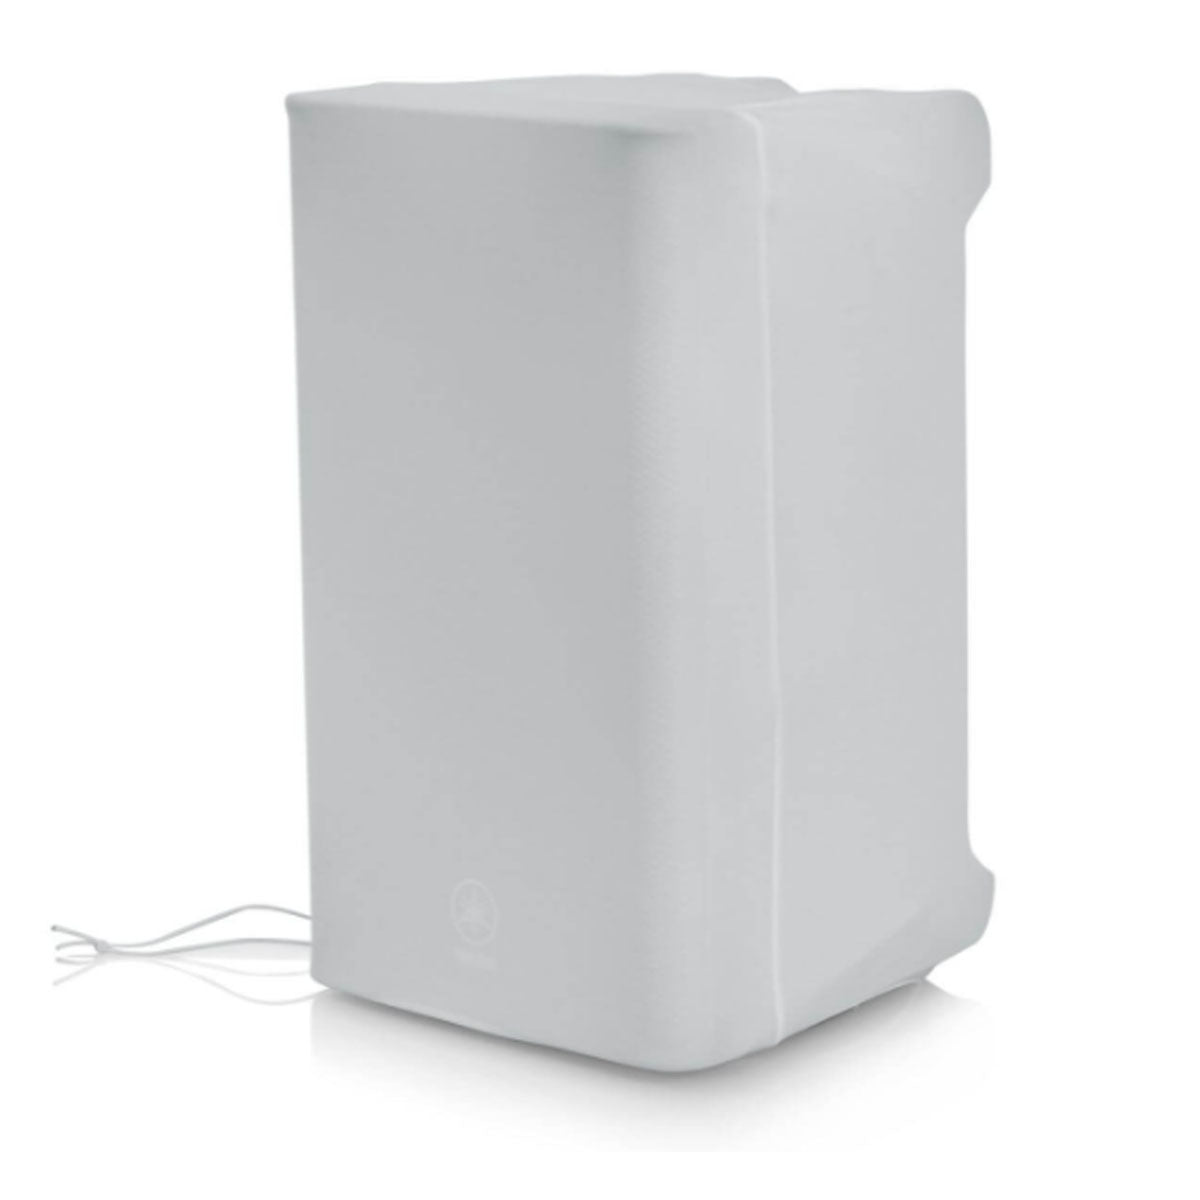 Gator GPA-STRETCH-10-W Stretchy Speaker Dust Cover White (fits most 10-12inch Speakers)